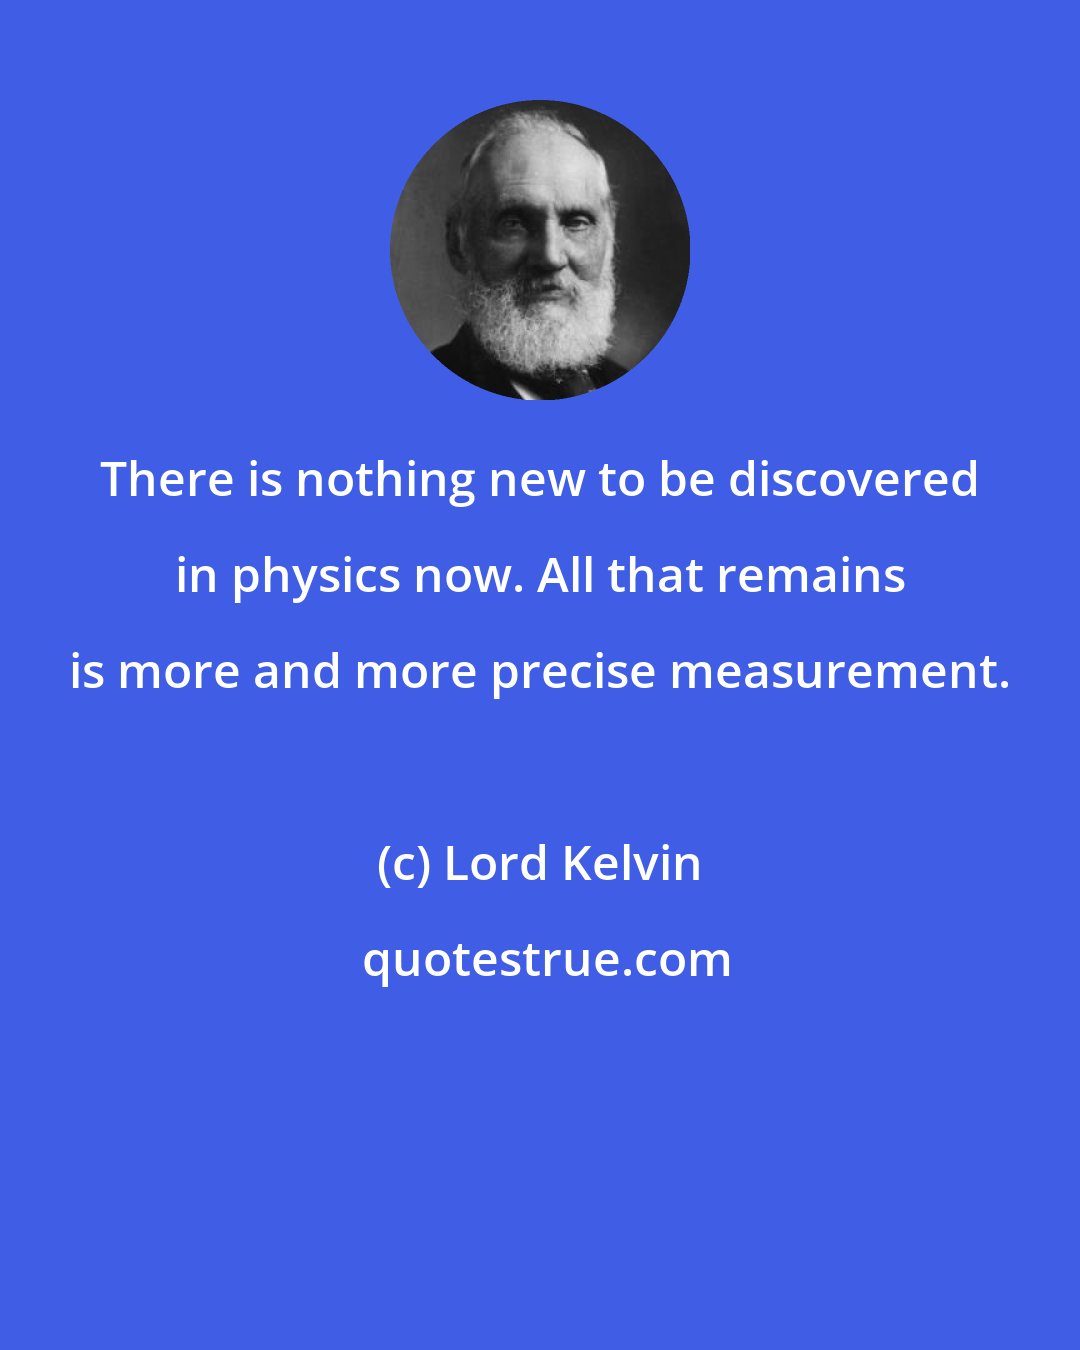 Lord Kelvin: There is nothing new to be discovered in physics now. All that remains is more and more precise measurement.